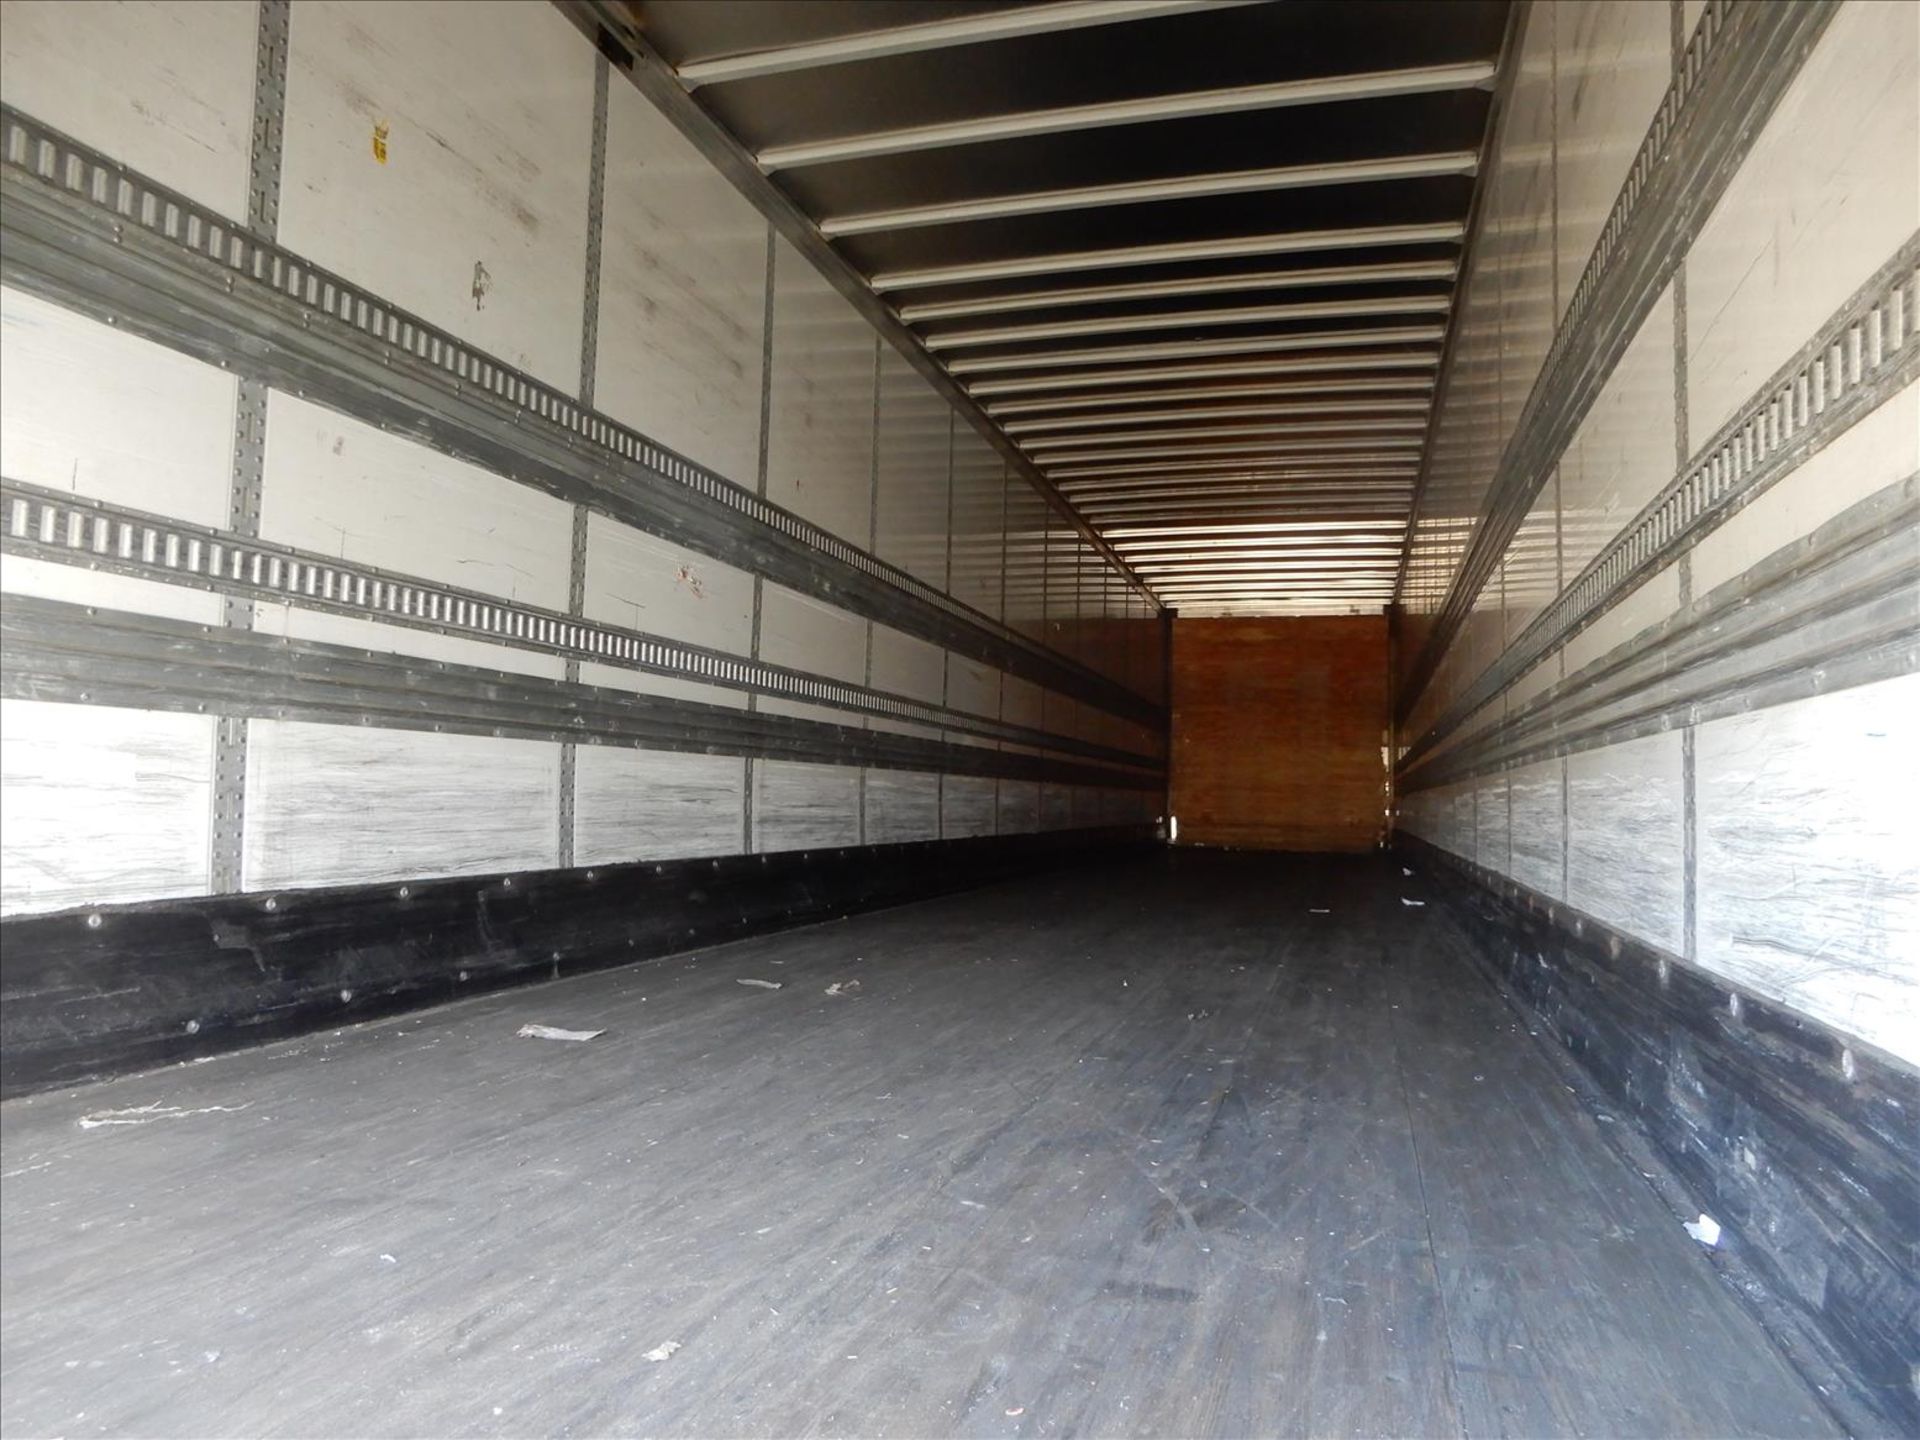 2012 Stoughton Trailer - Located in Indianapolis, IN - Image 13 of 21